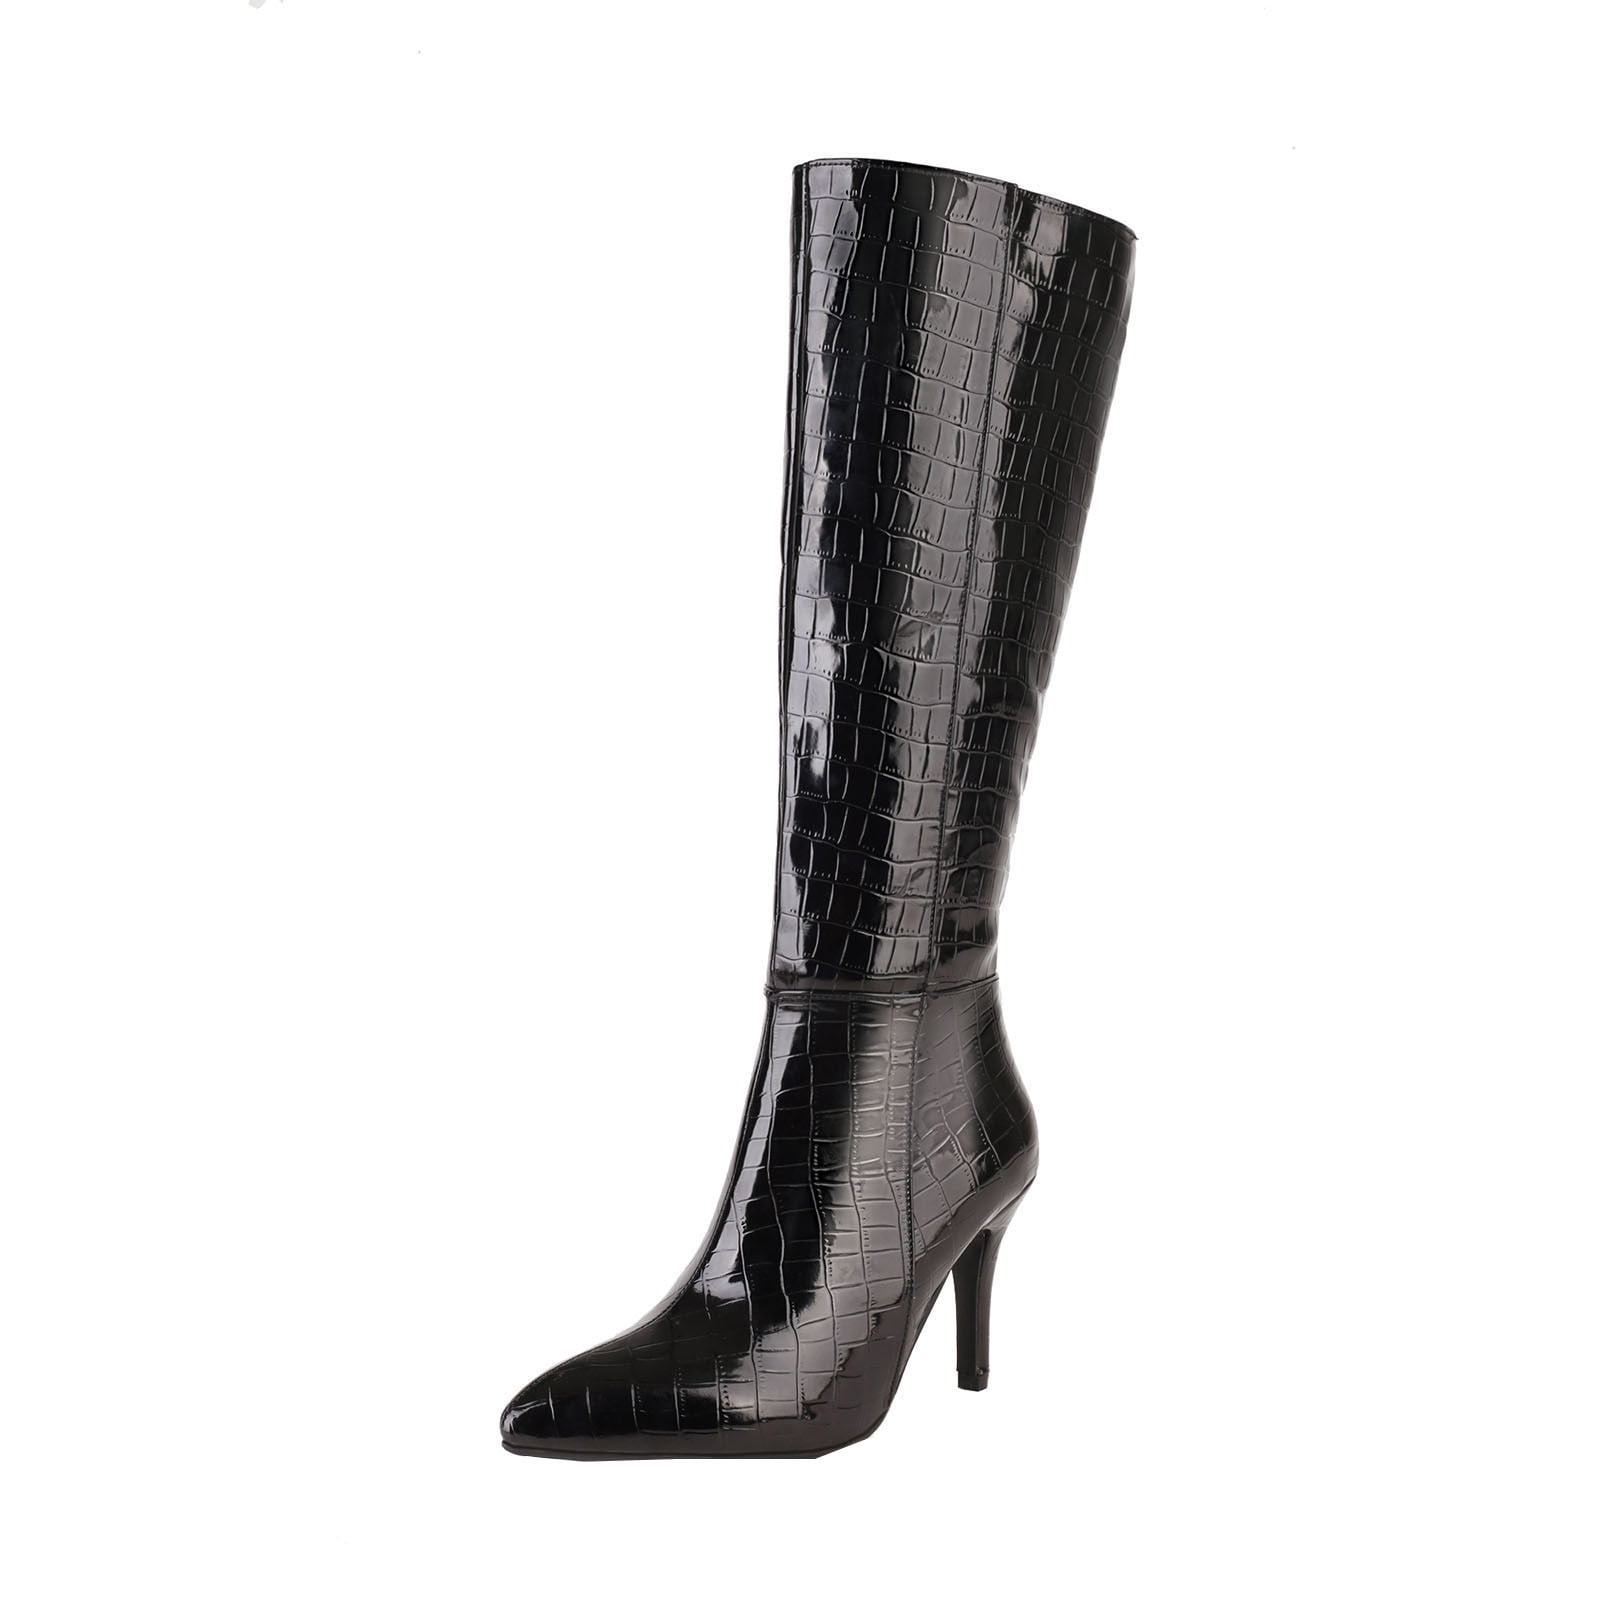 Black Tall Boots by Gianvito Rossi on Sale